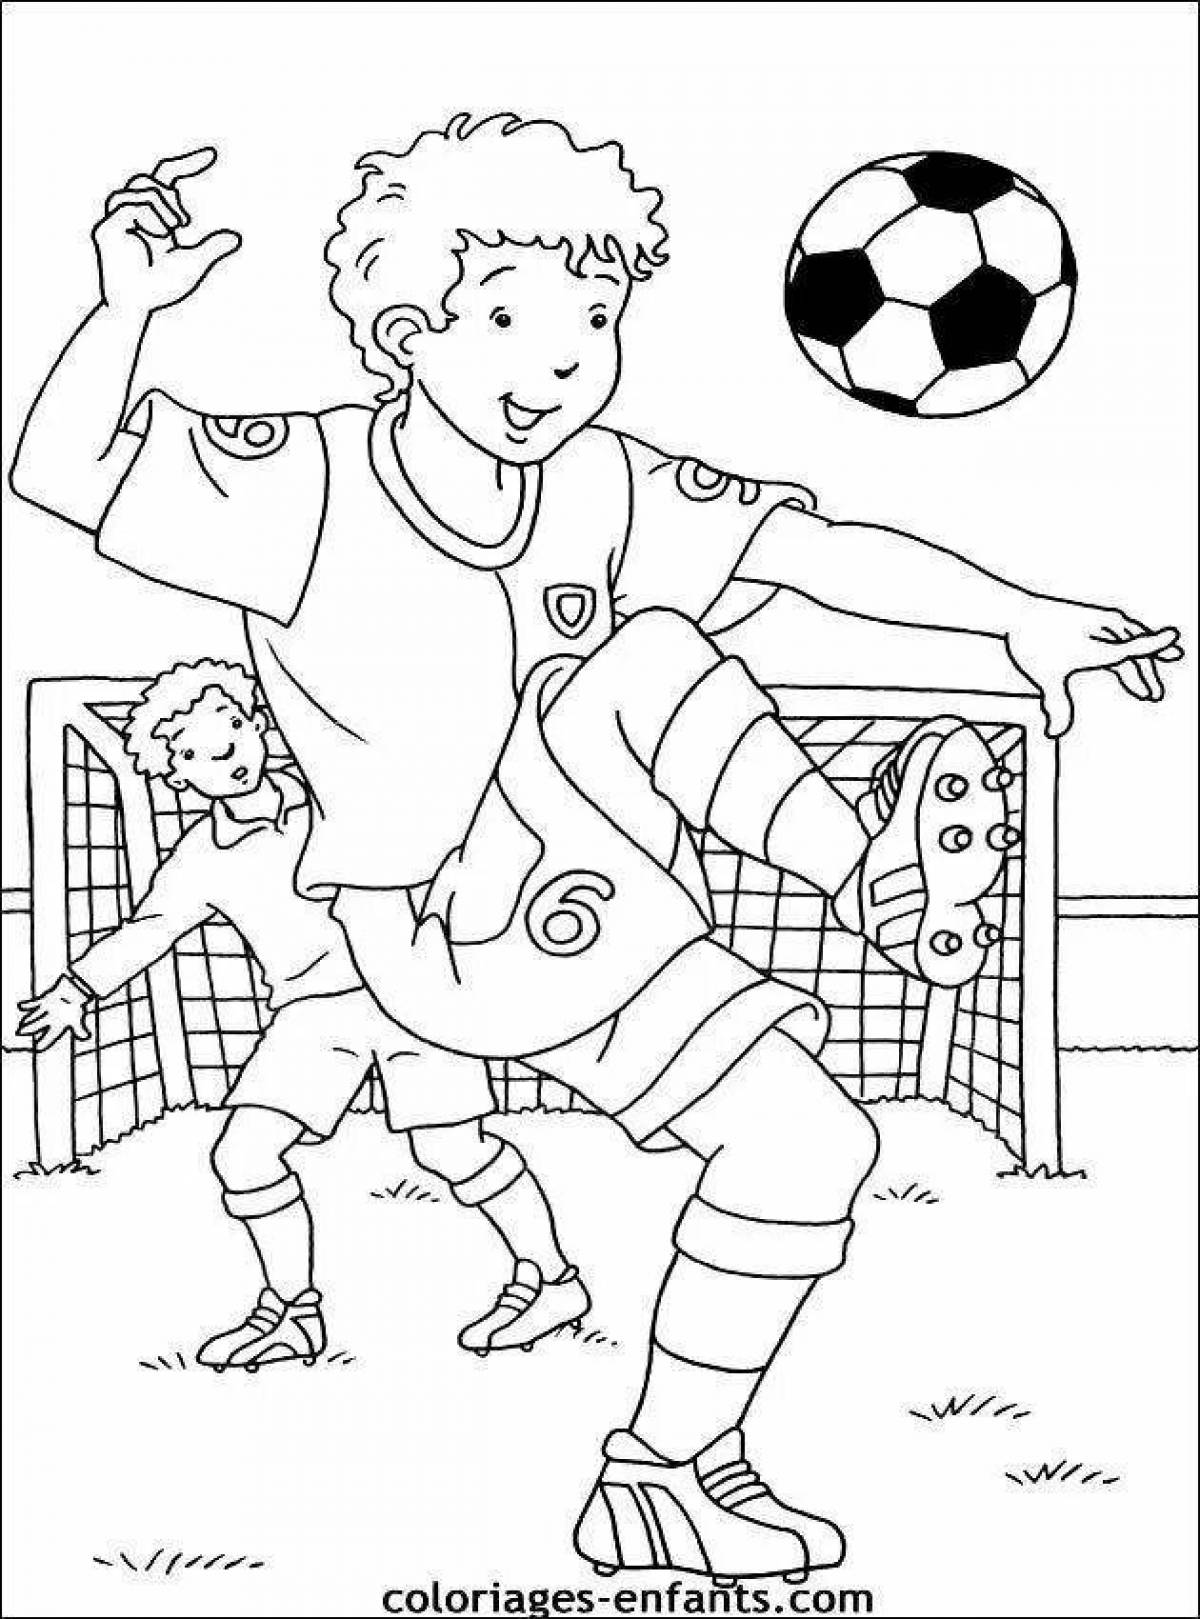 Intriguing football coloring book for boys